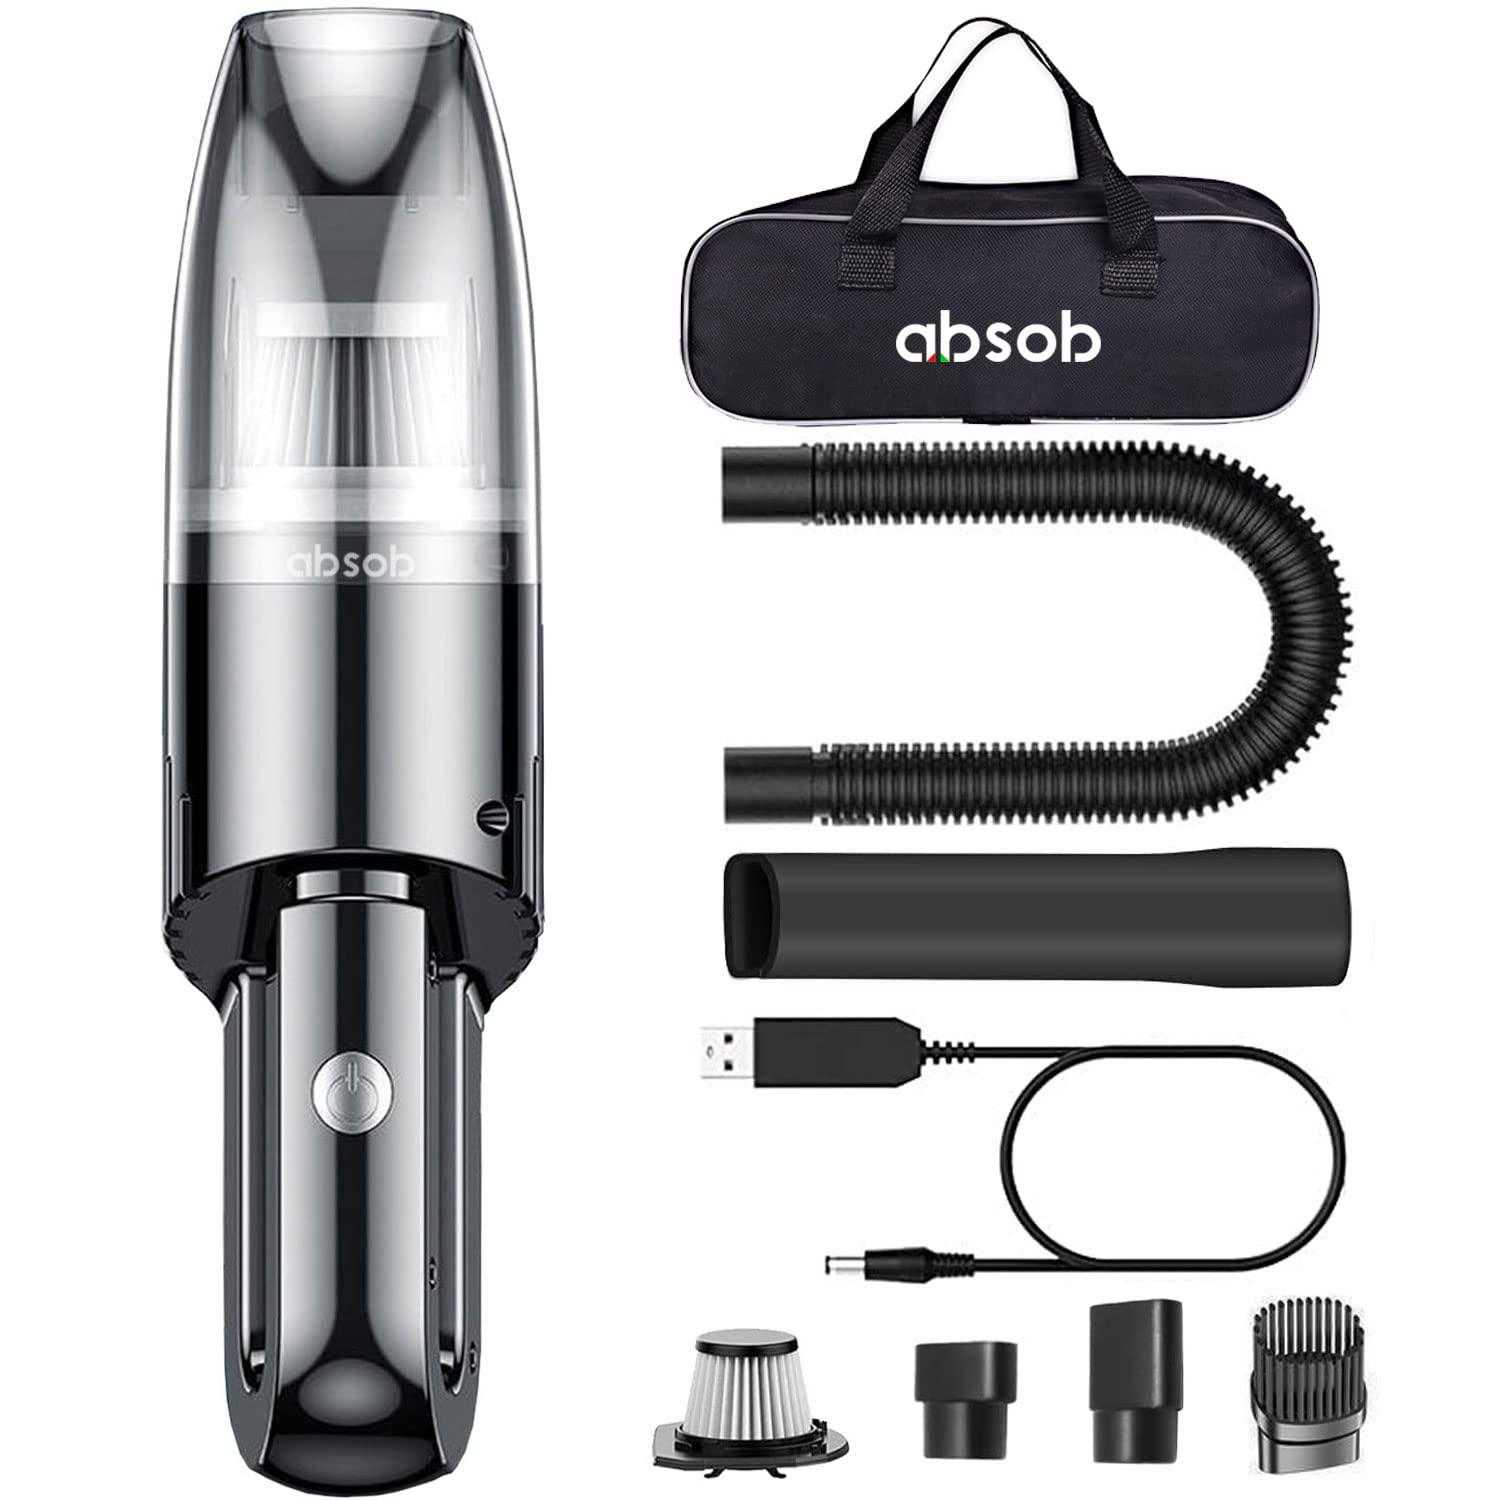 absob handheld vacuum cleaner cordless, mini portable car hand vacuum cleaner, powerful suction hand vac, rechargeable lightw